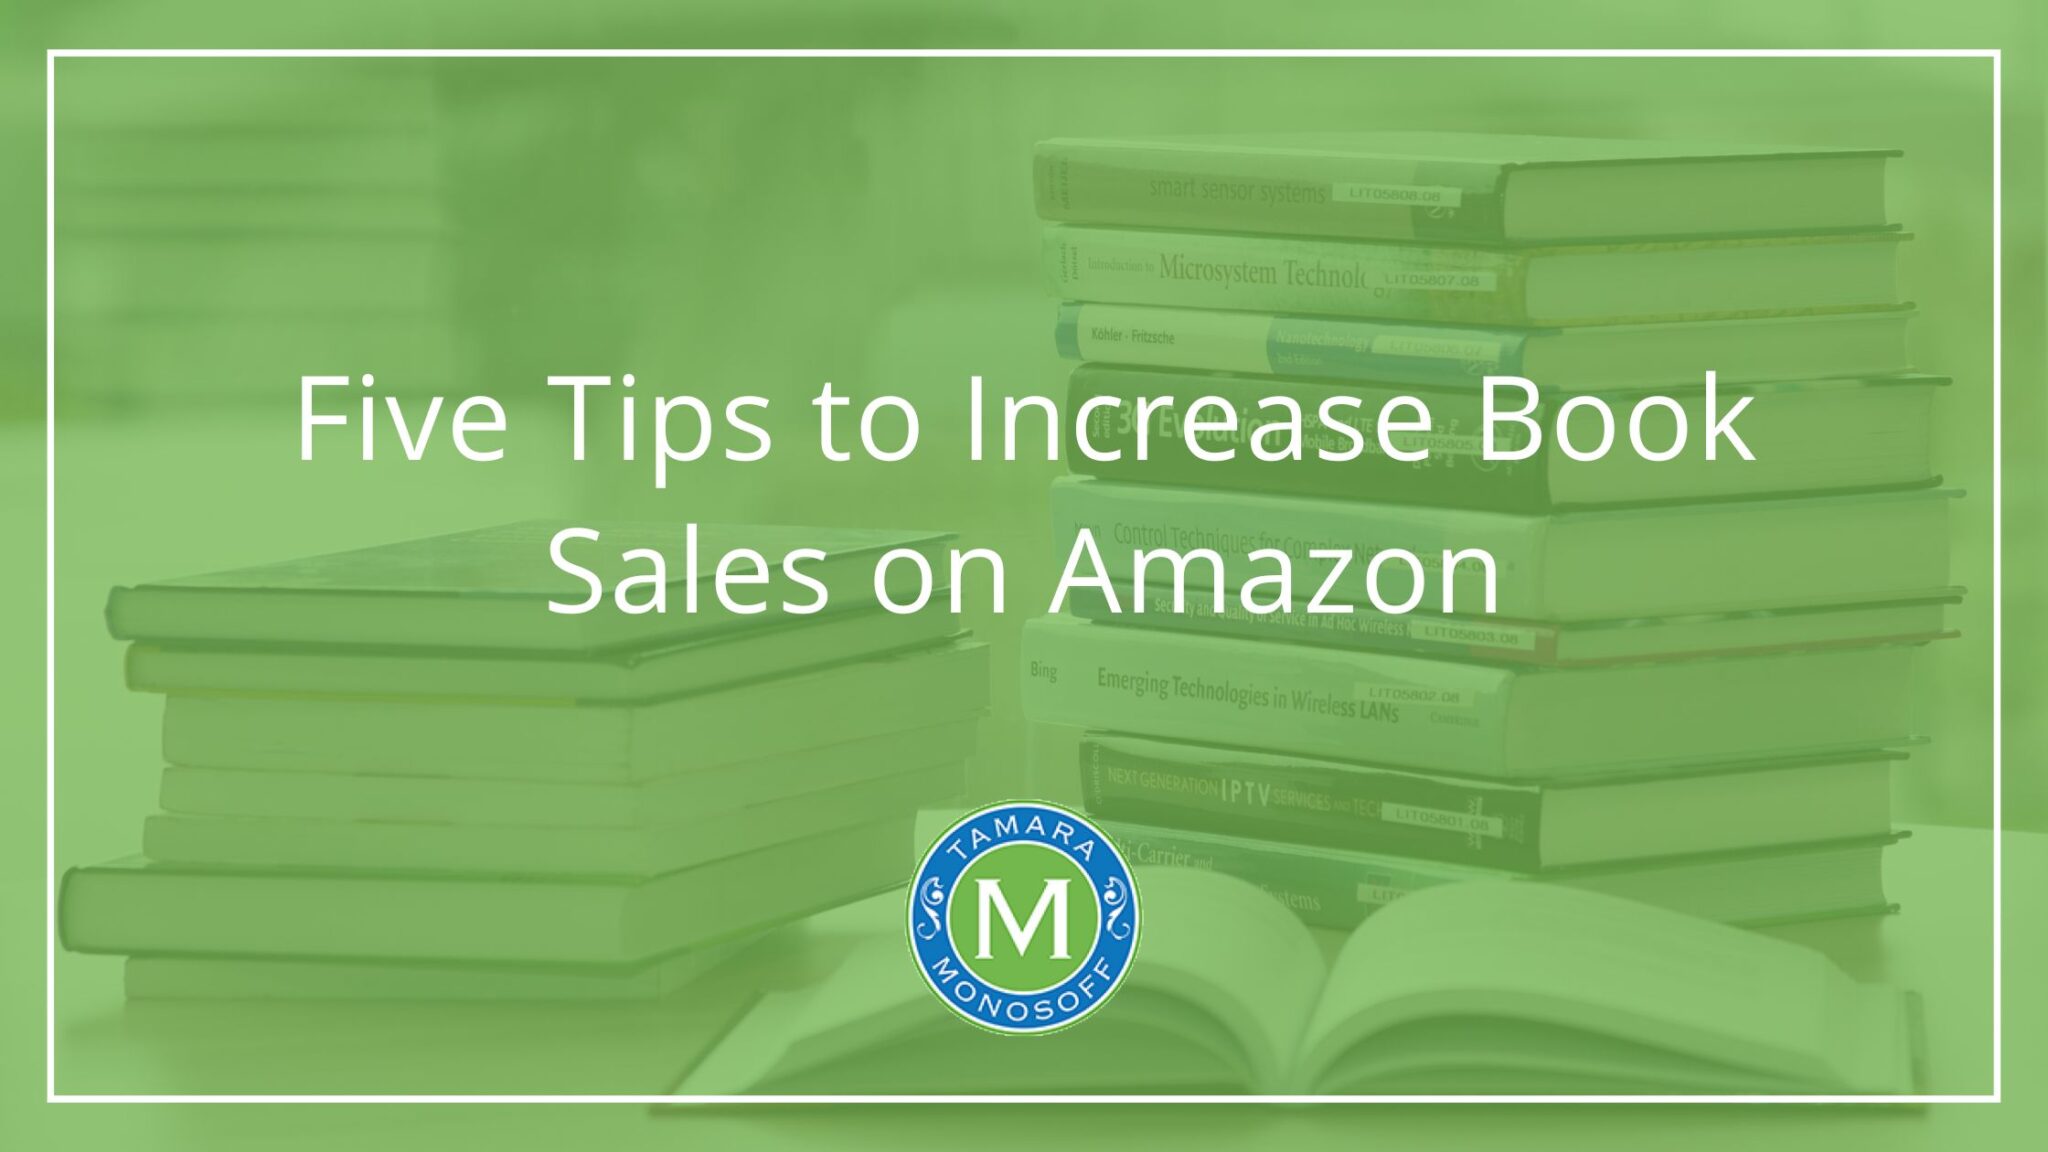 Five tips to increase book sales on Amazon